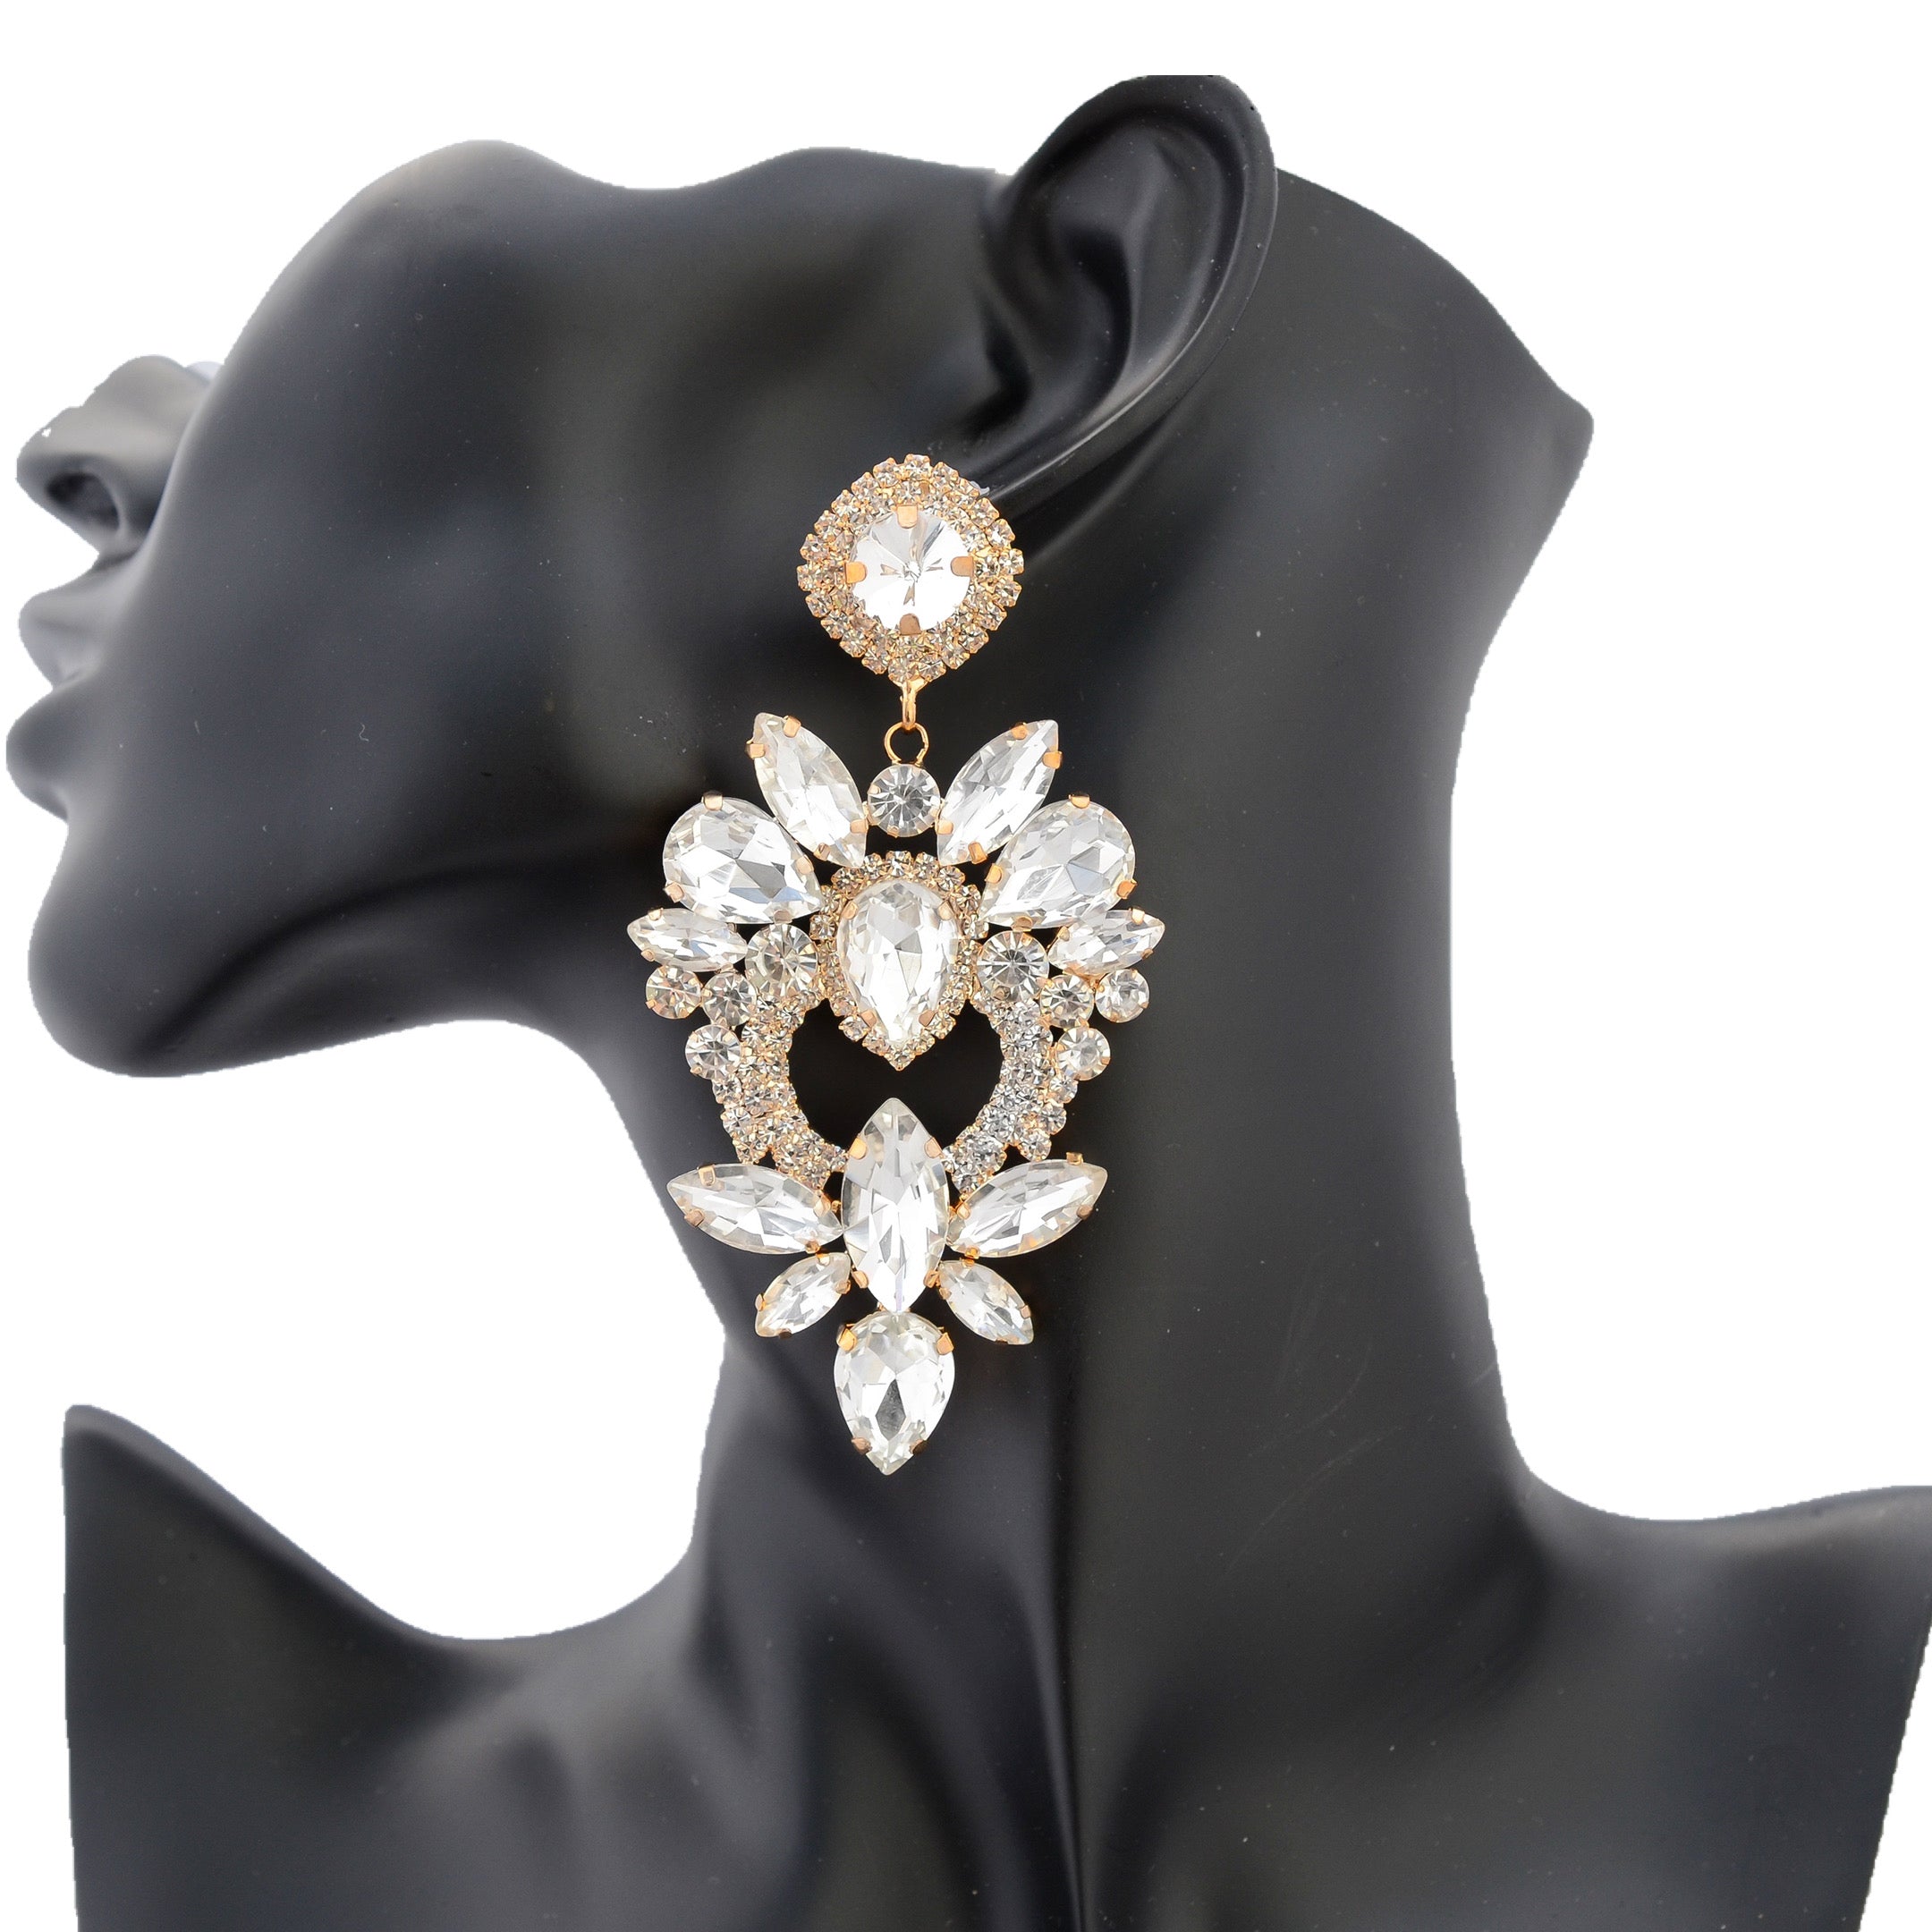 Paris - clear gold marquise cluster rhinestone earrings